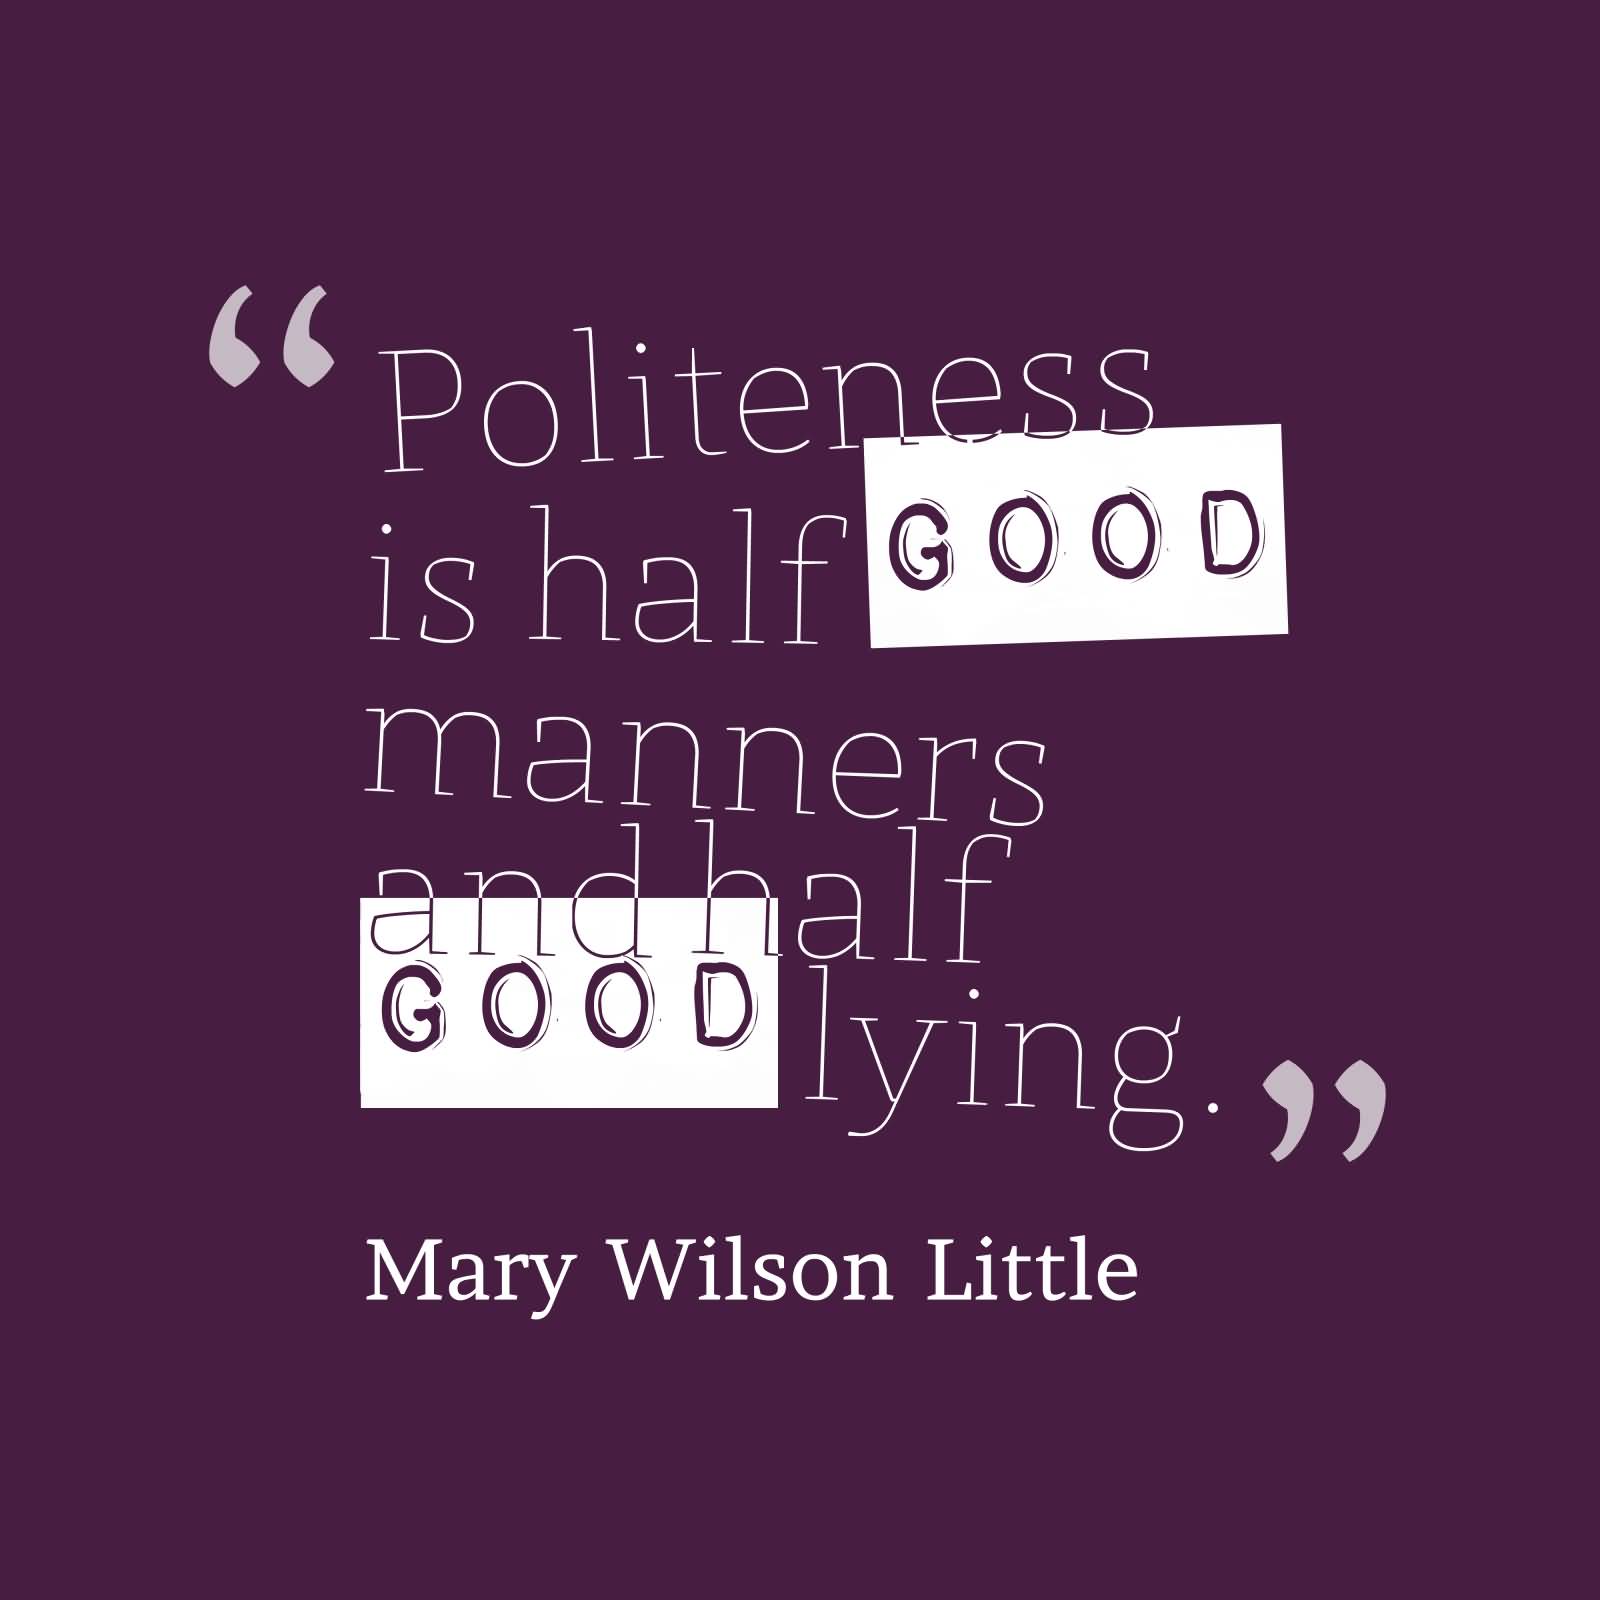 Politeness is half good manners and half good lying. Mary Wilson Little